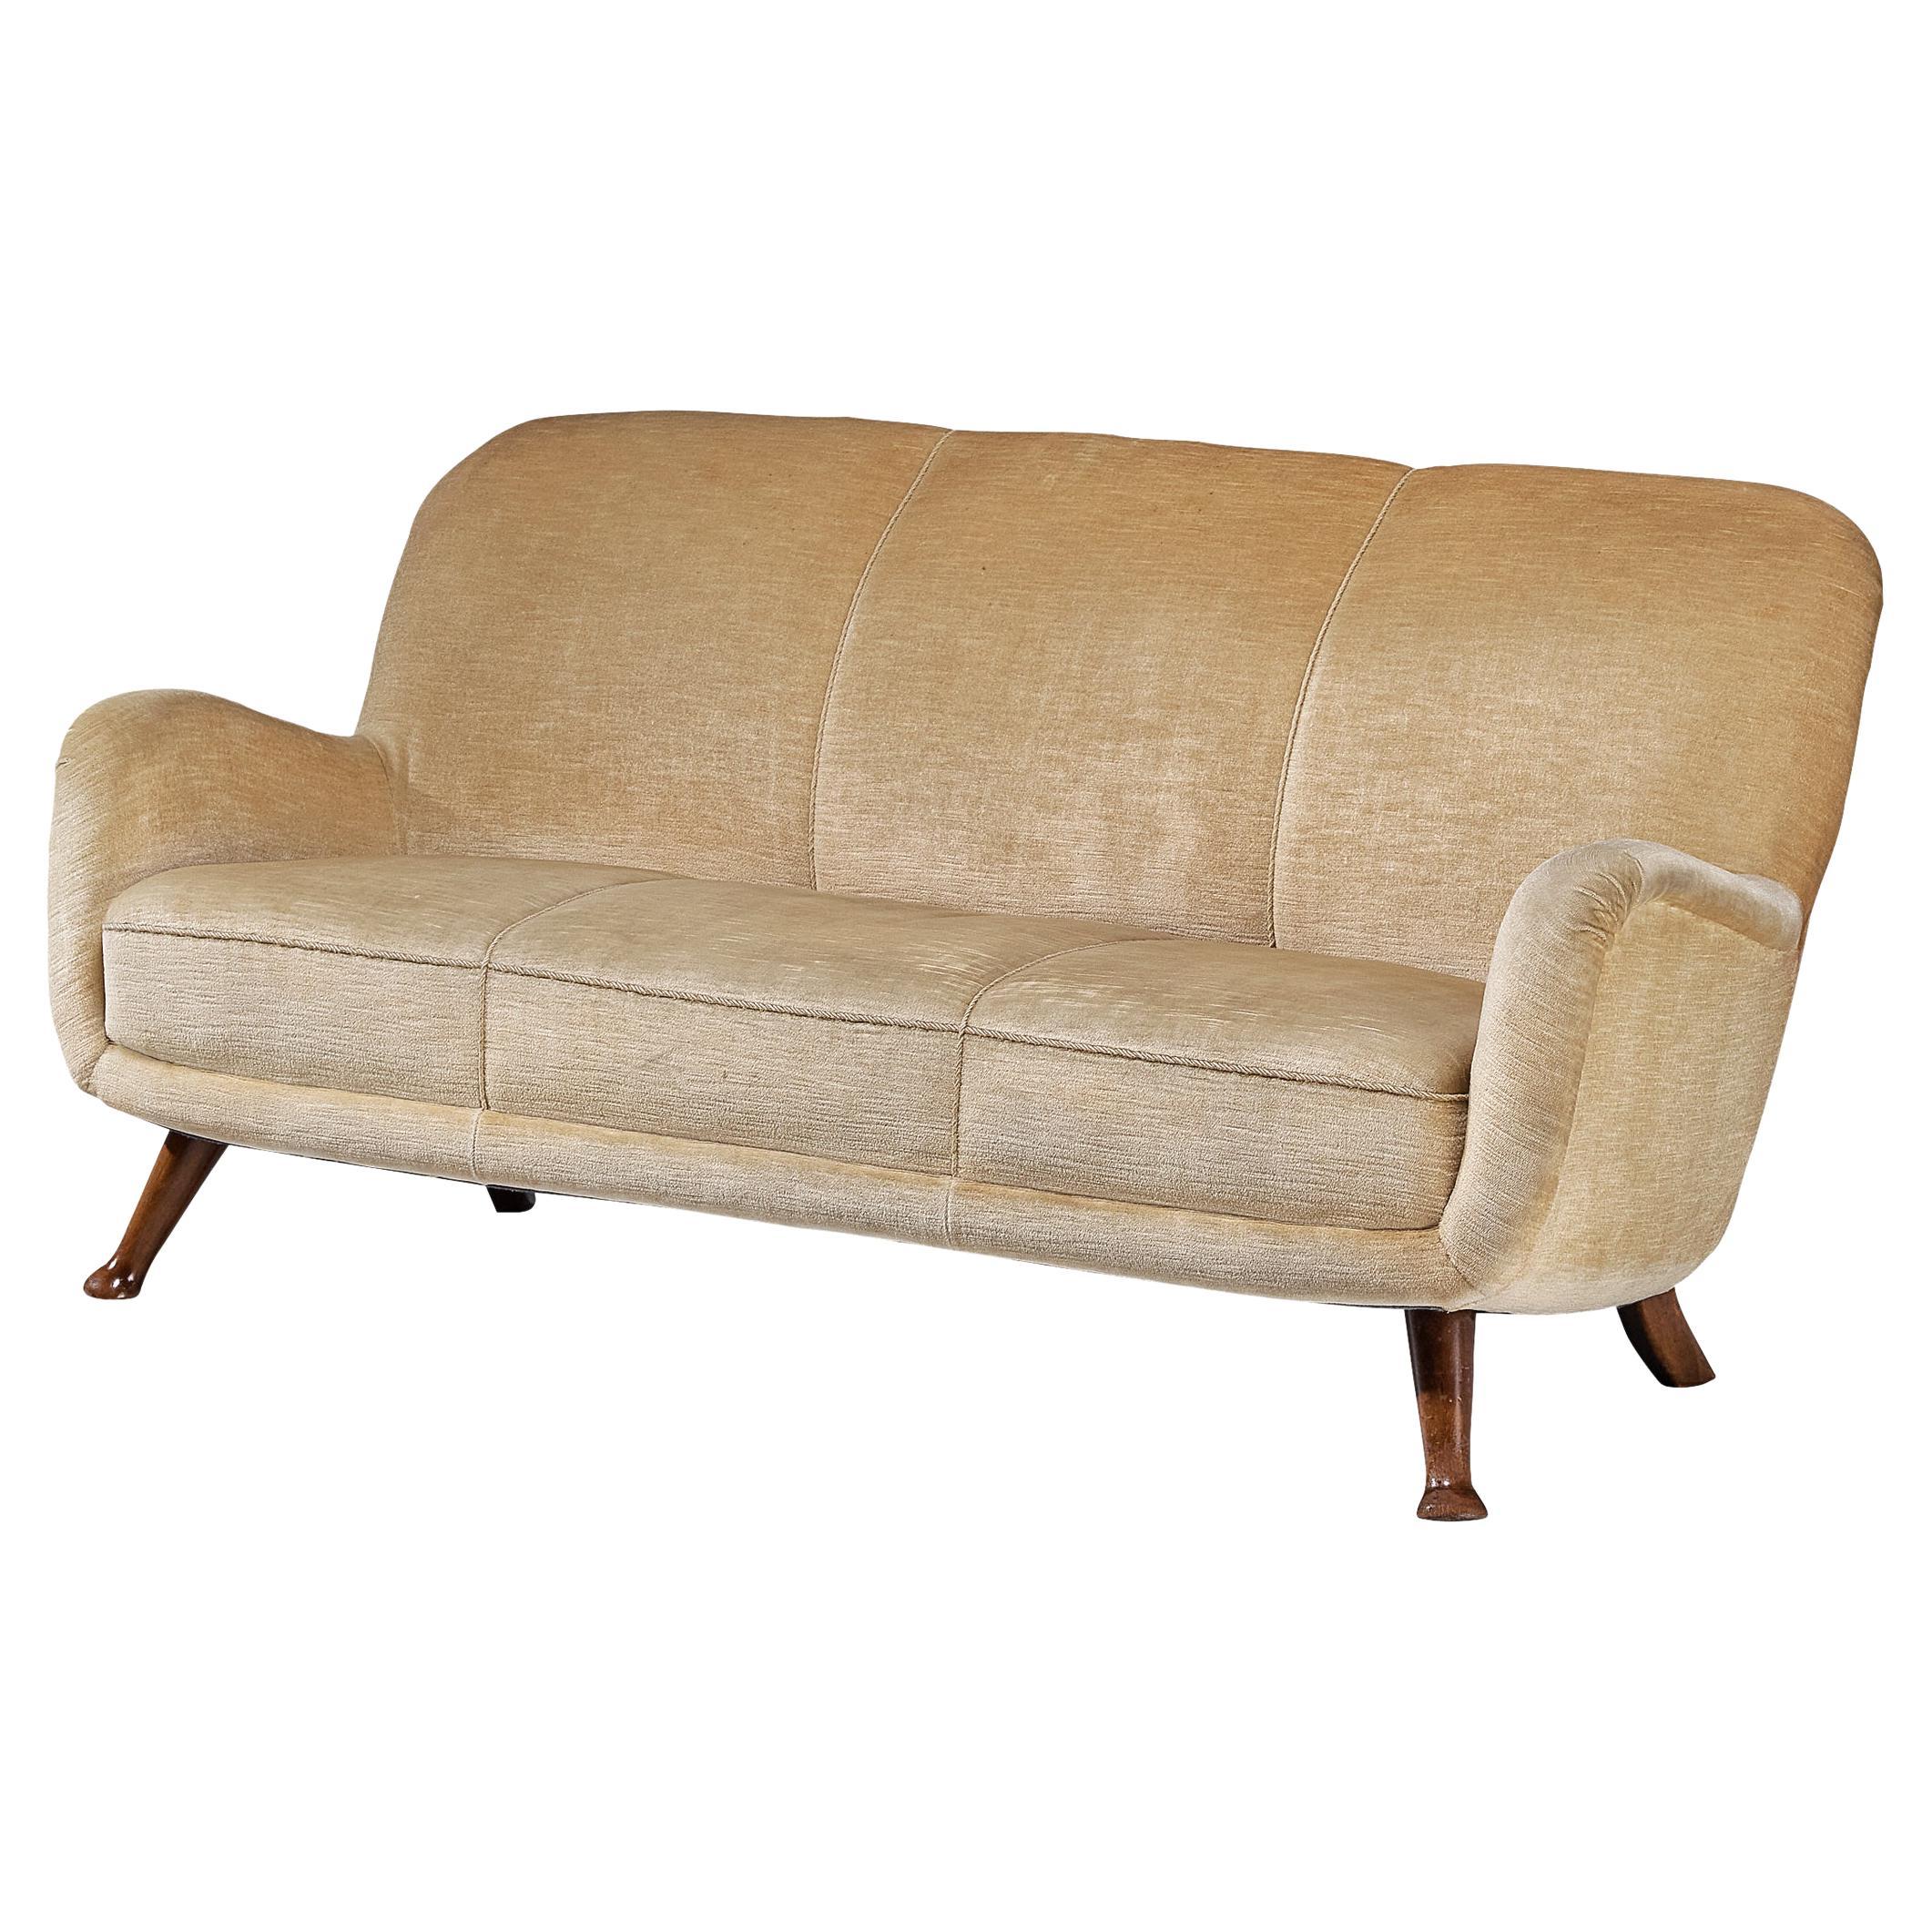 Berga Mobler Sofa in Beige Wool Upholstery  For Sale